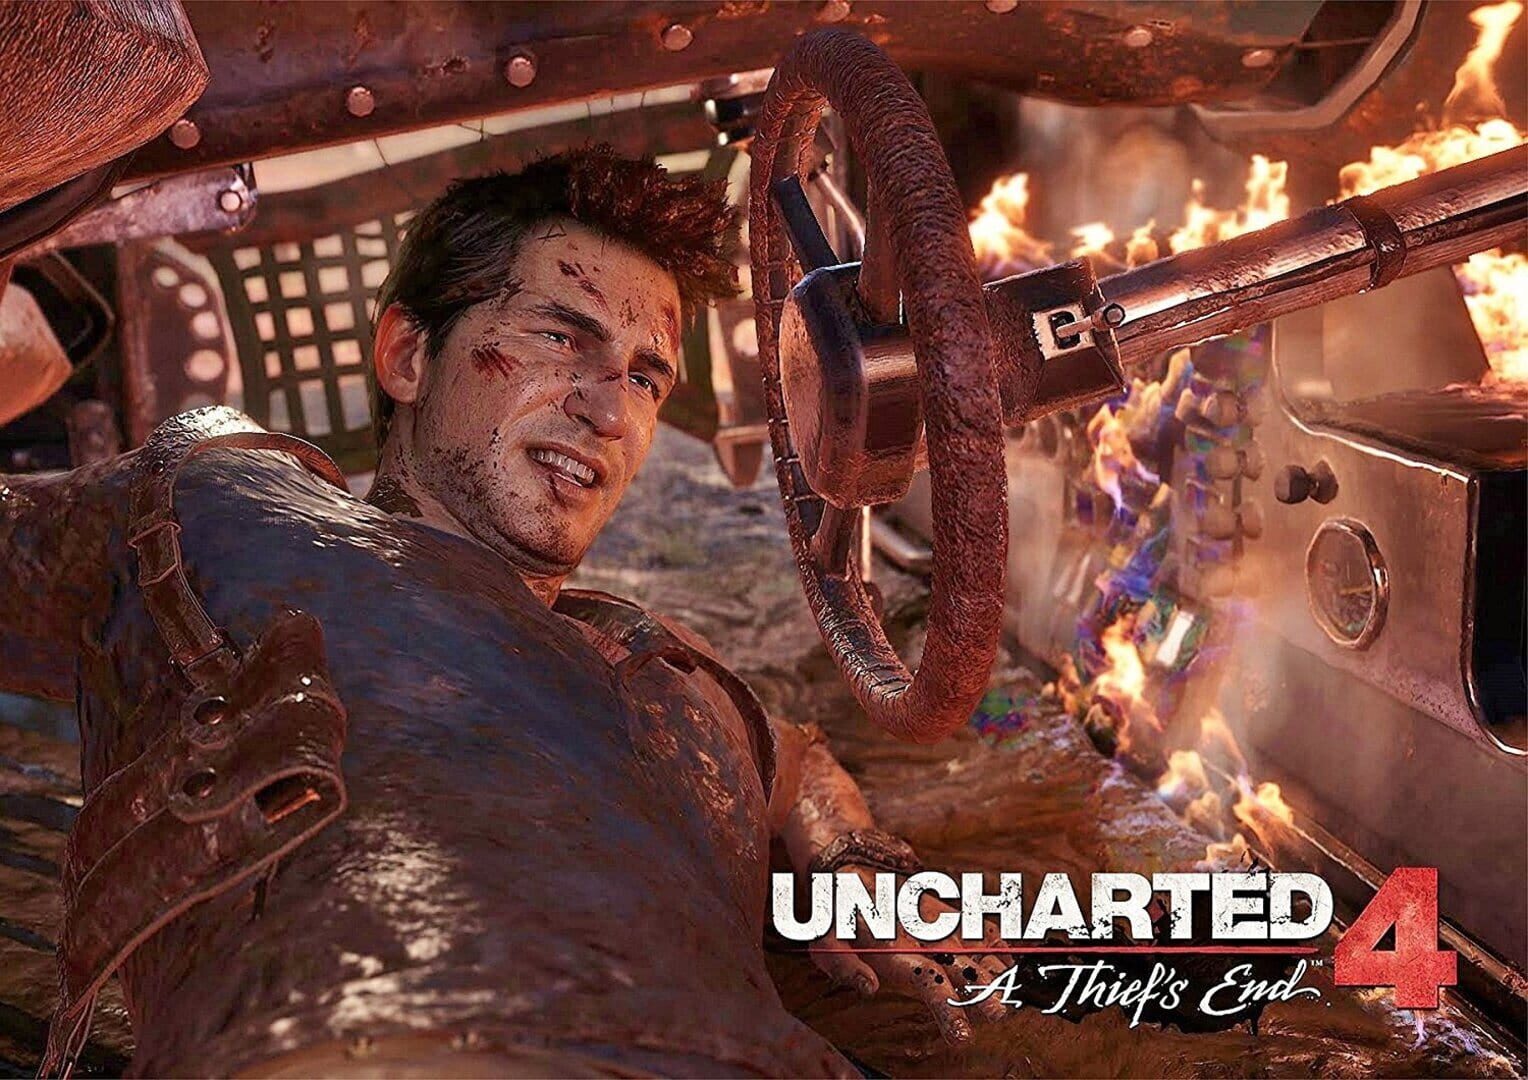 Arte - Uncharted 4: A Thief's End